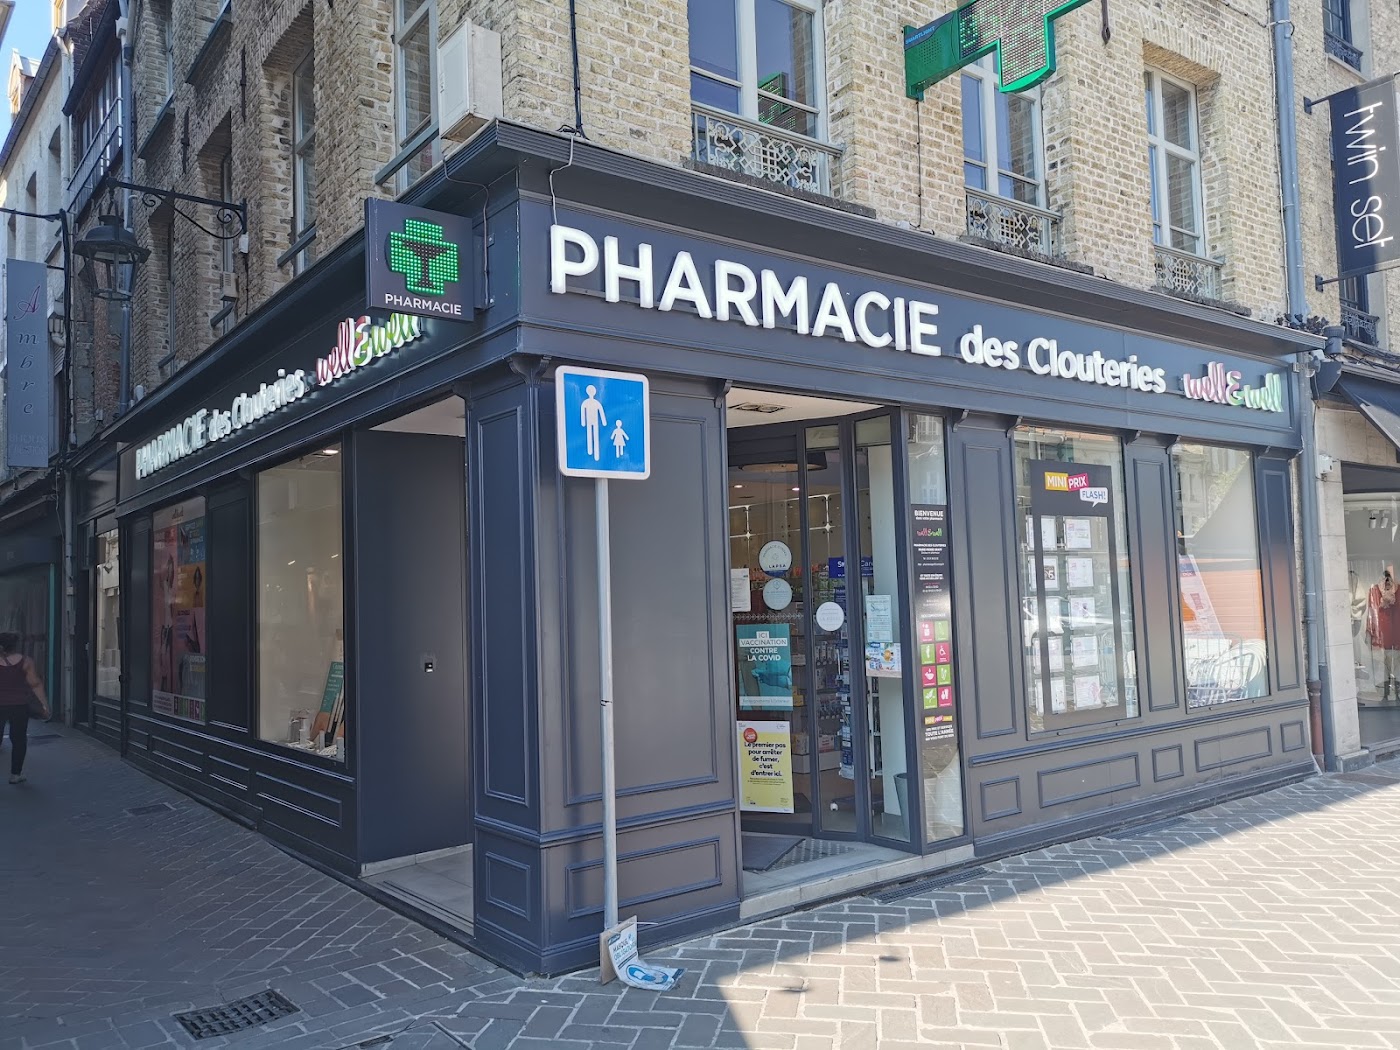 Pharmacie des Clouteries well&well